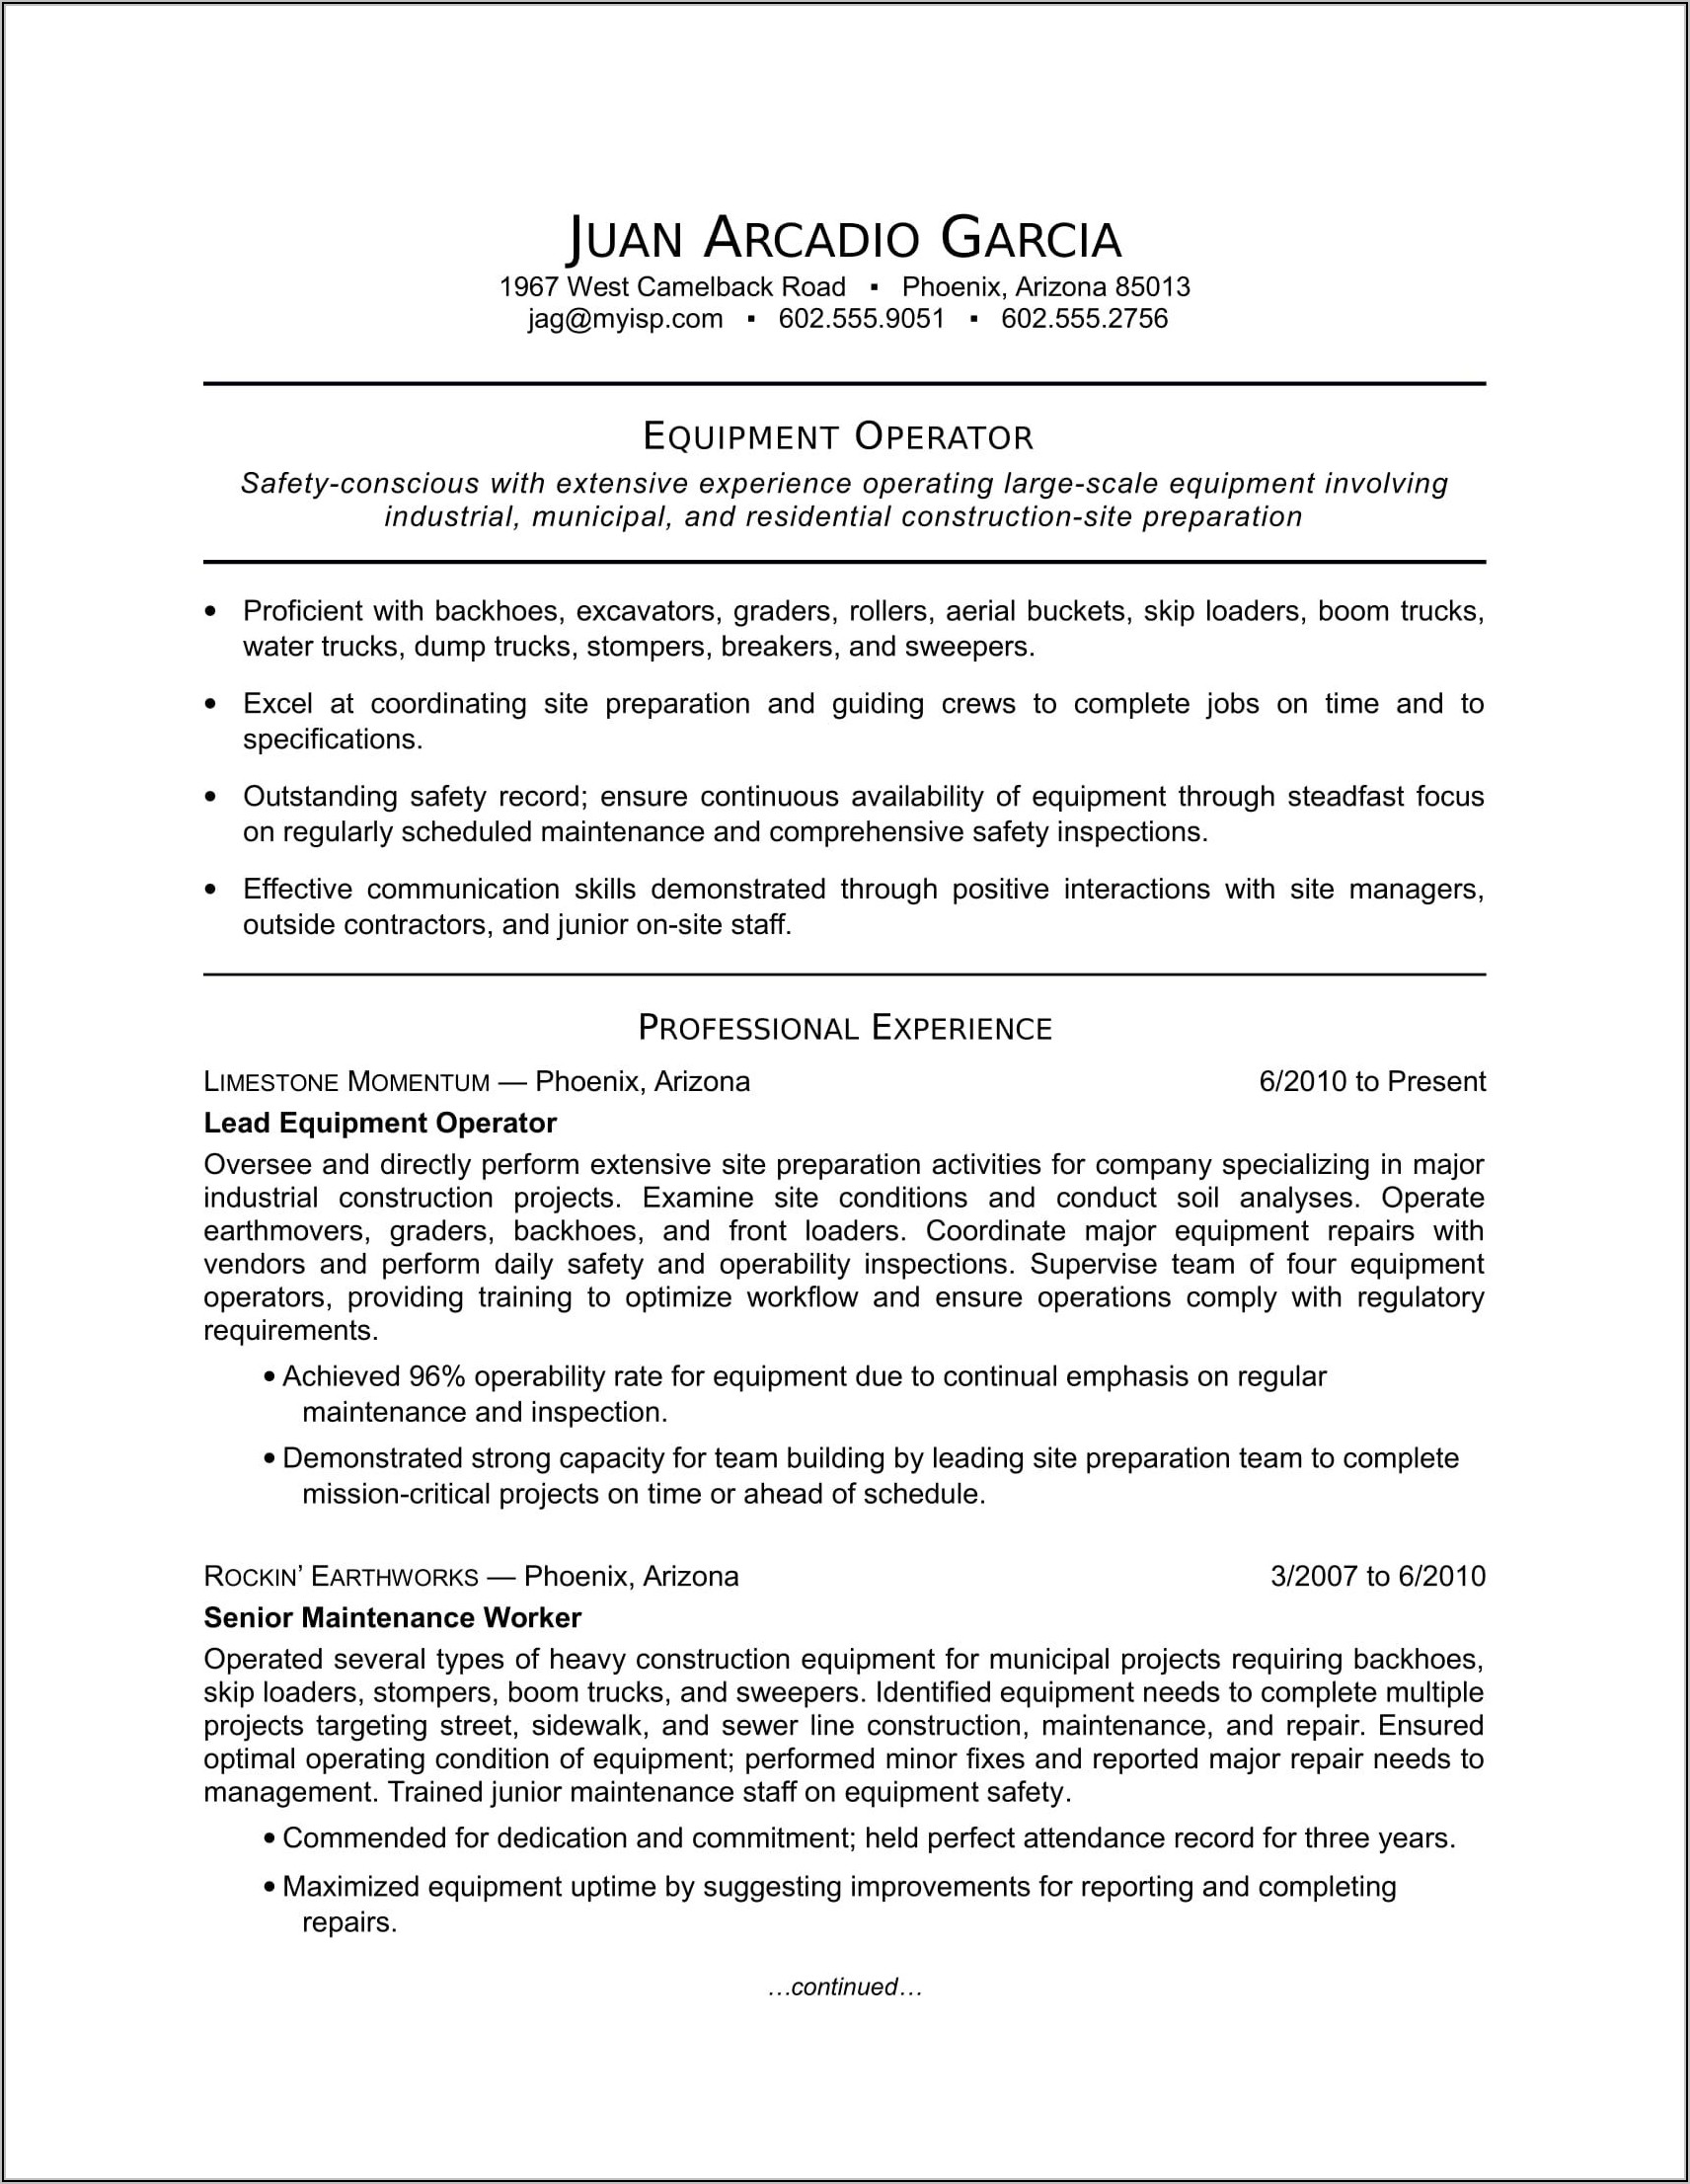 Resume Examples For Equipment Operator